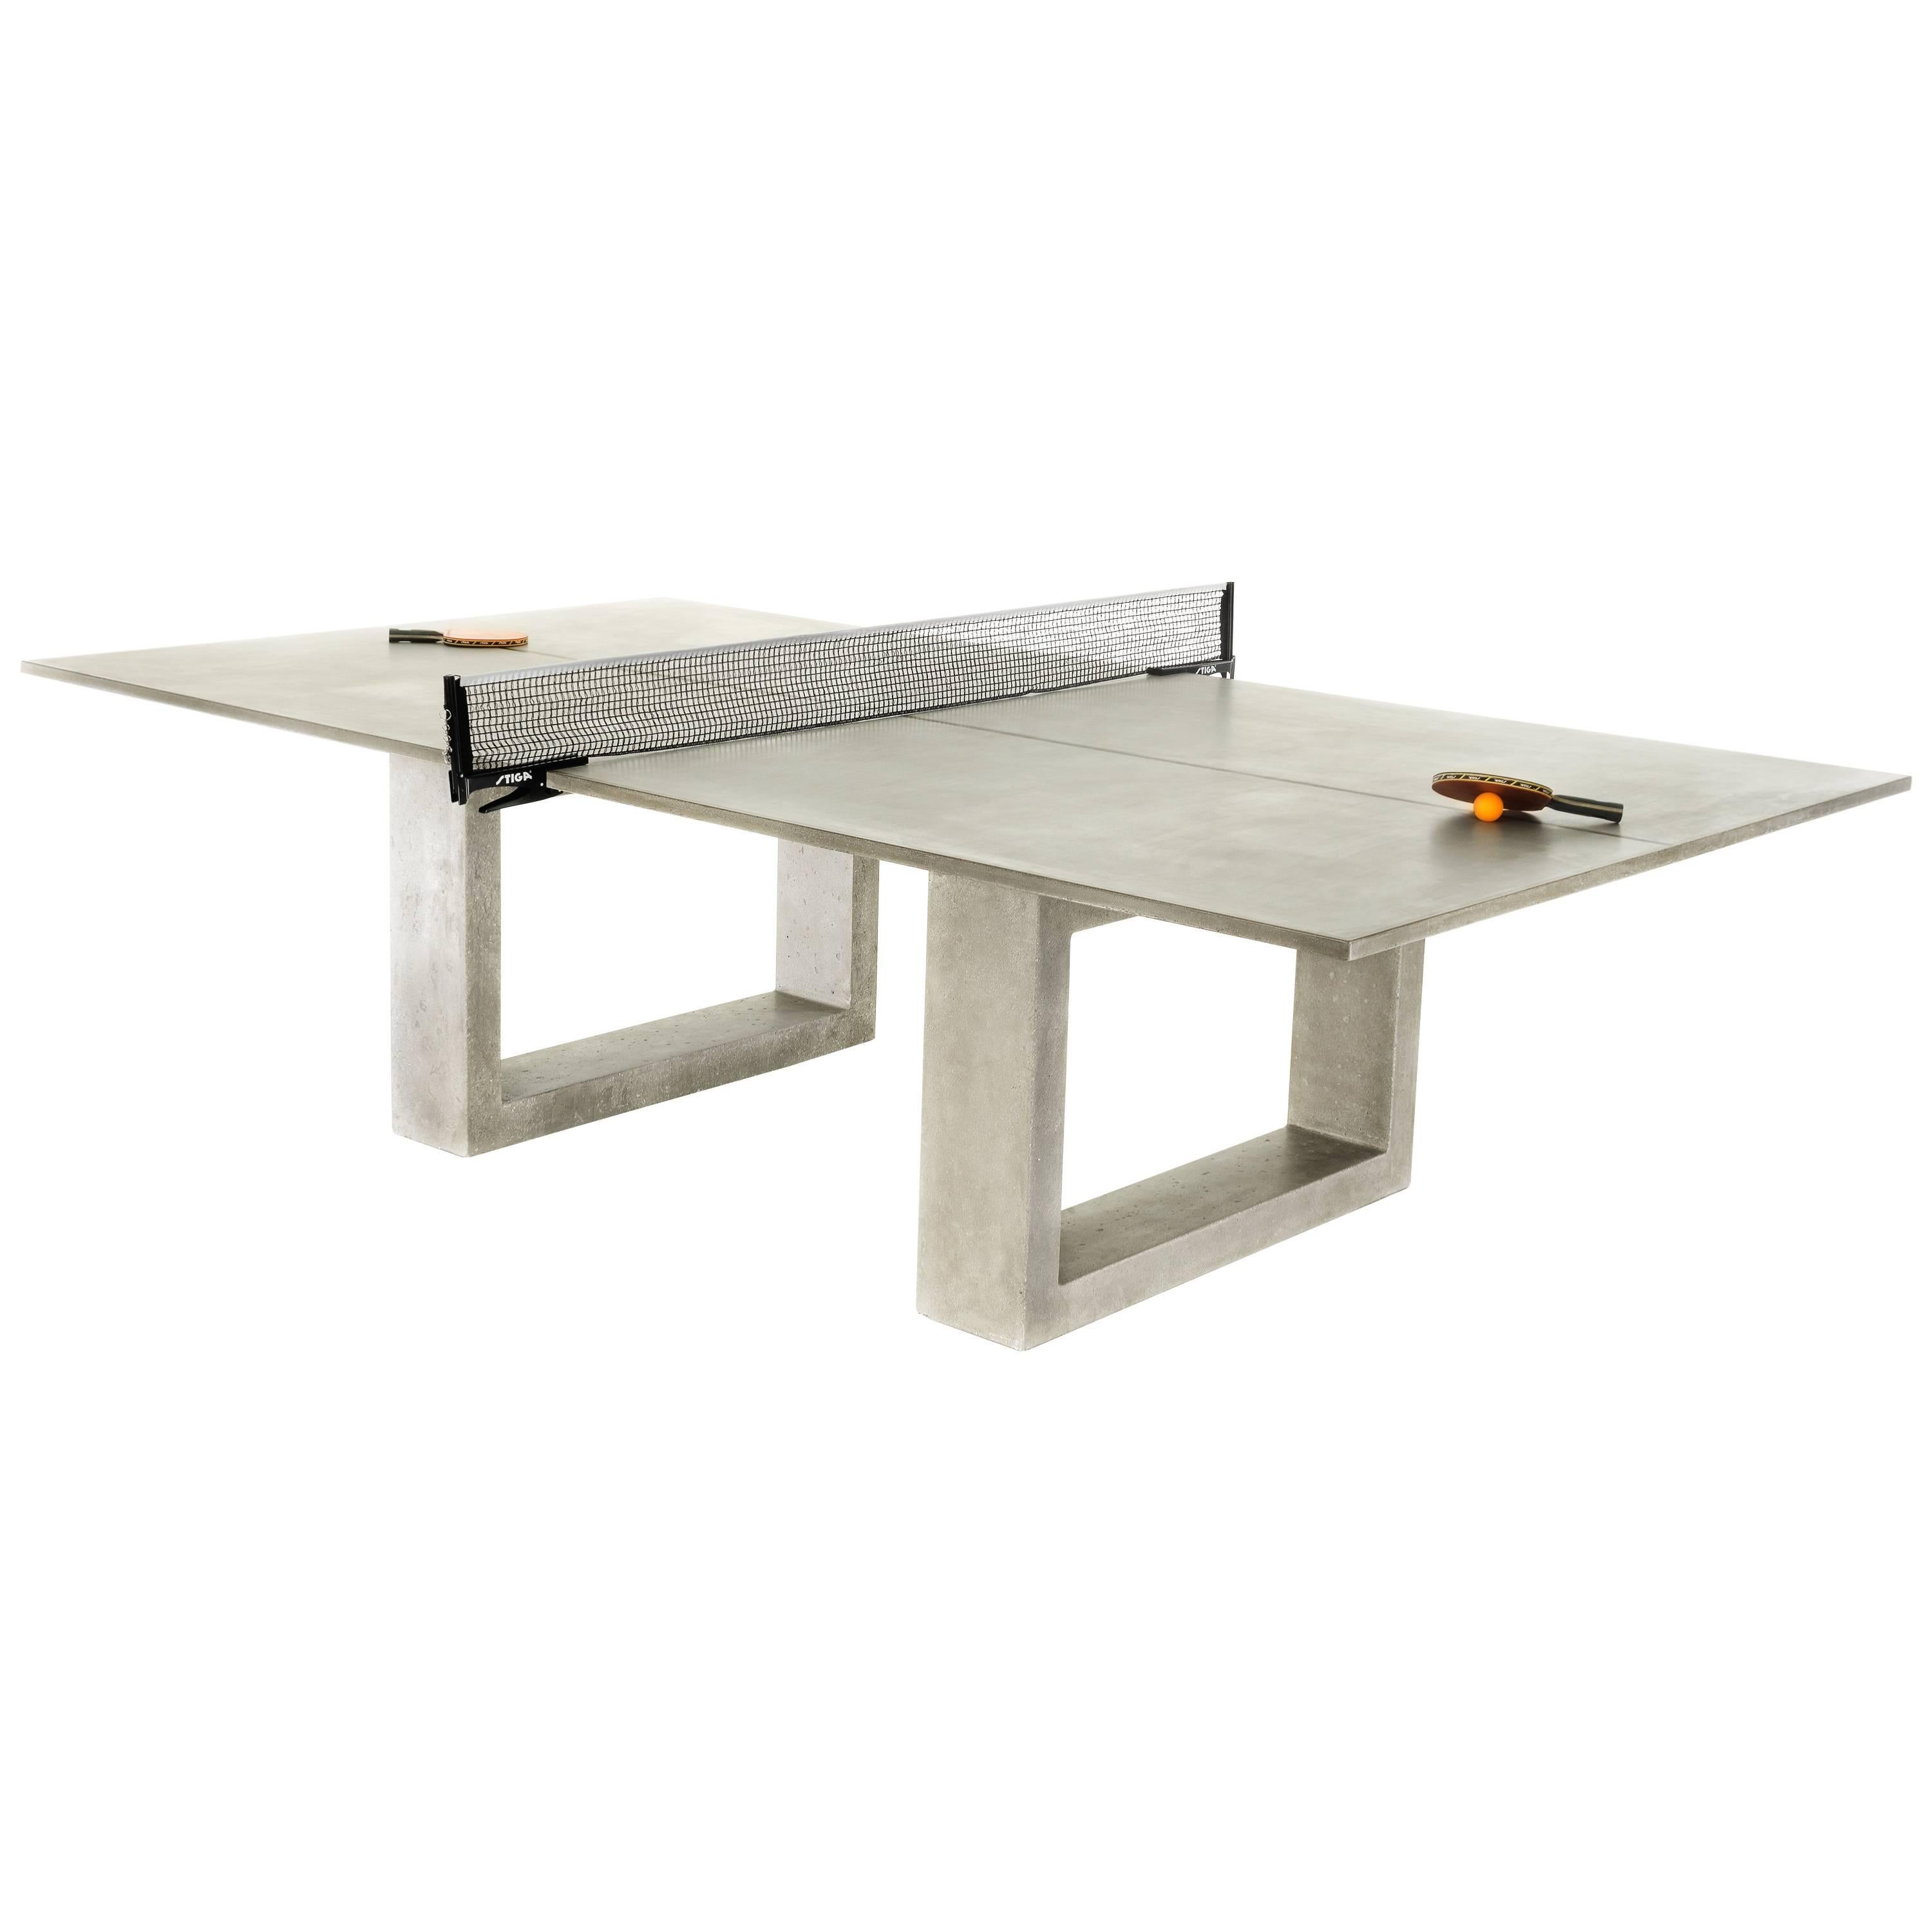 James de Wulf Concrete Ping Pong Table - Light Grey Finish, Available Now For Sale